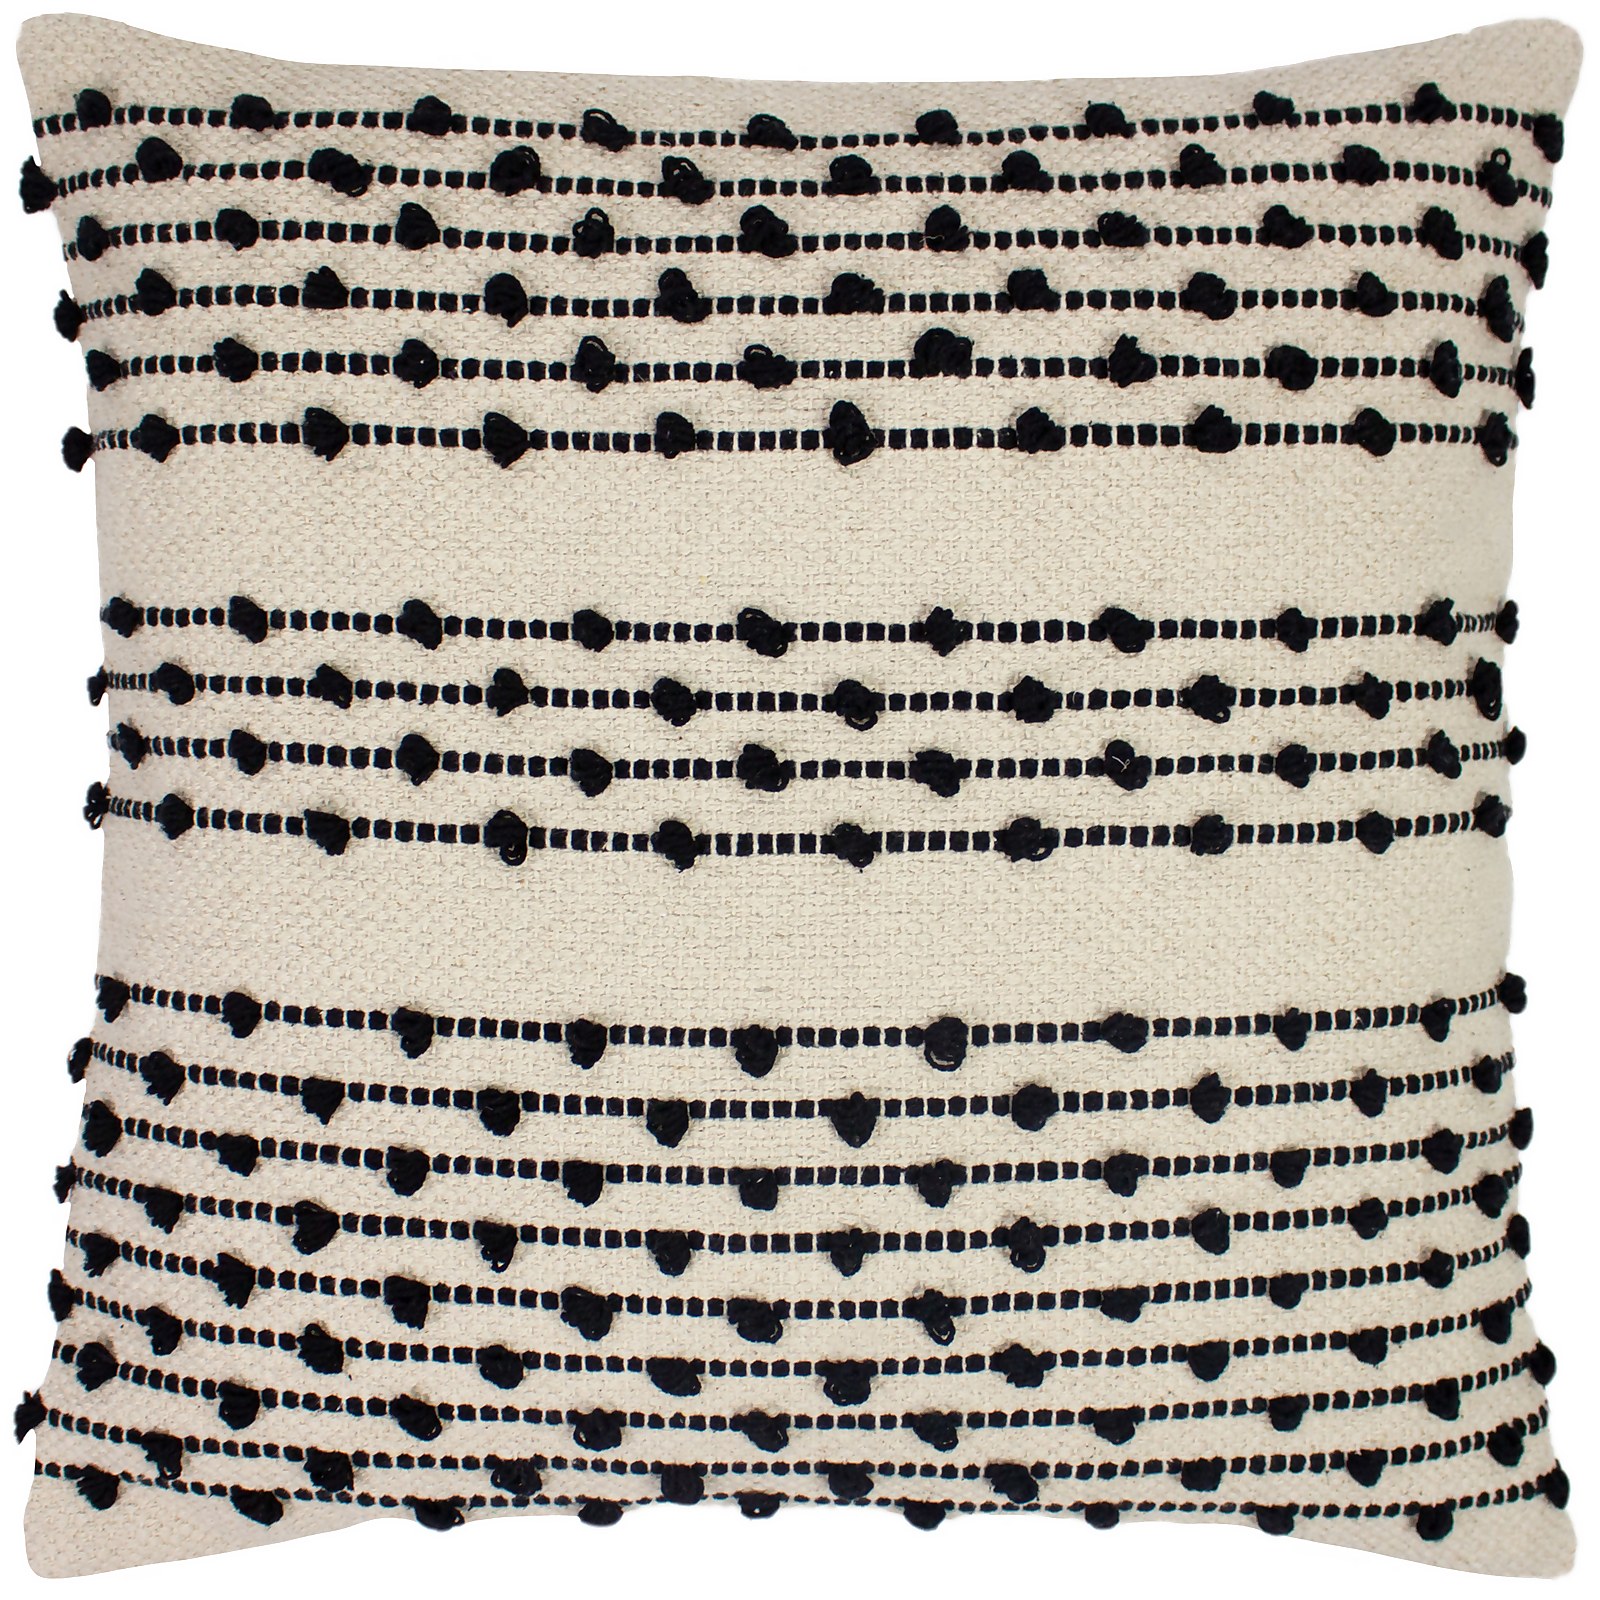 Photo of Cotton Line Knotted Cushion - 45x45cm